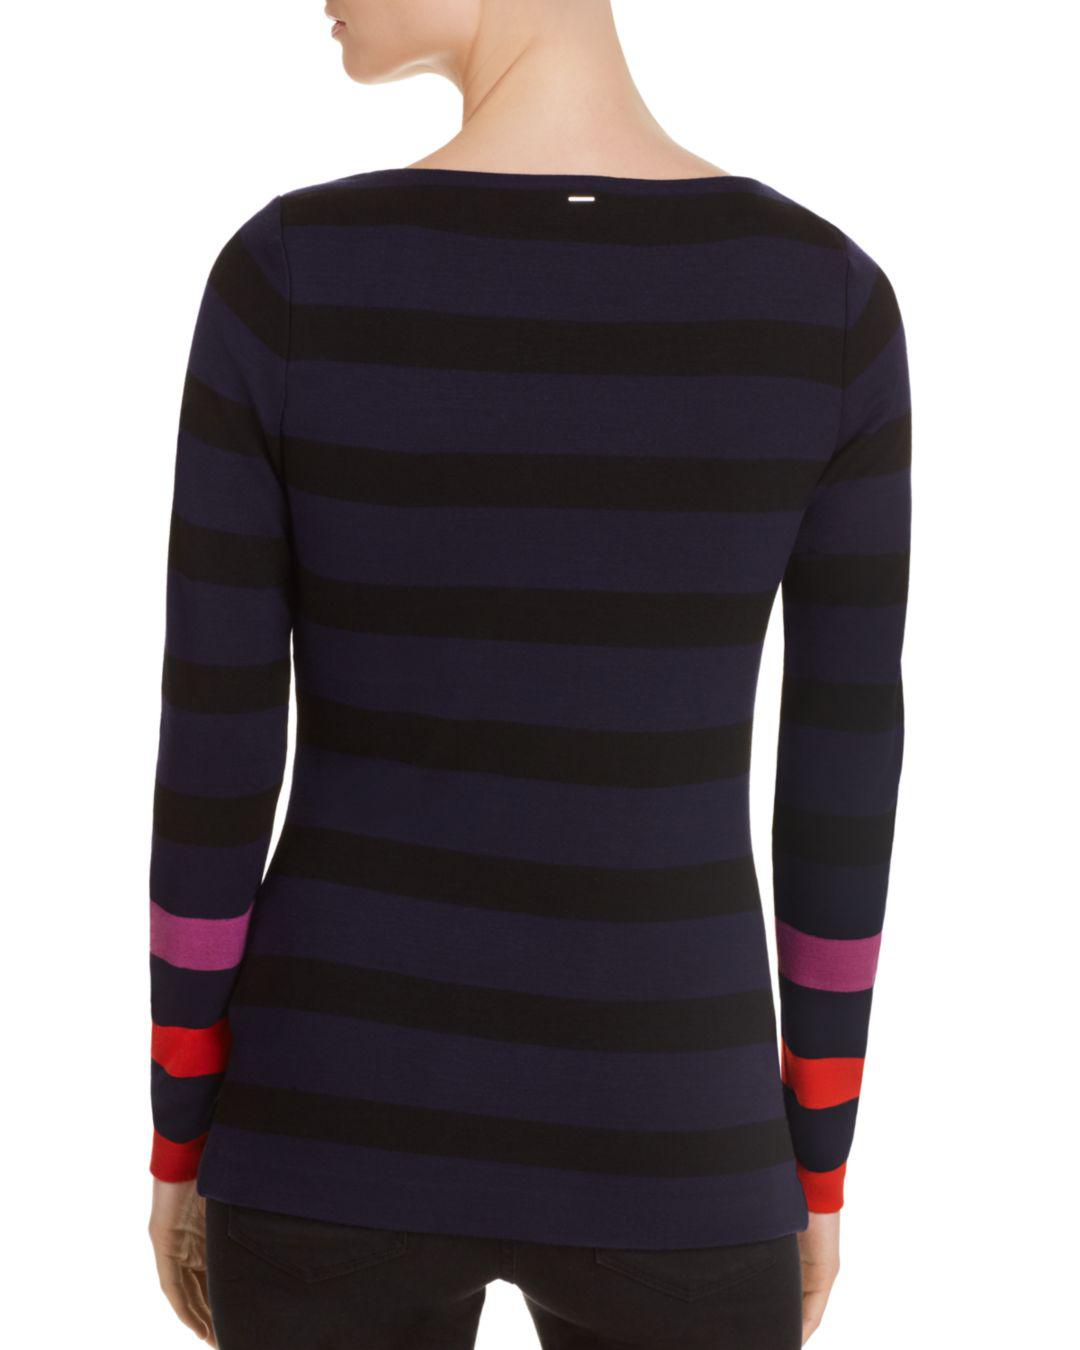 BOSS Elive Striped Top in Blue - Lyst